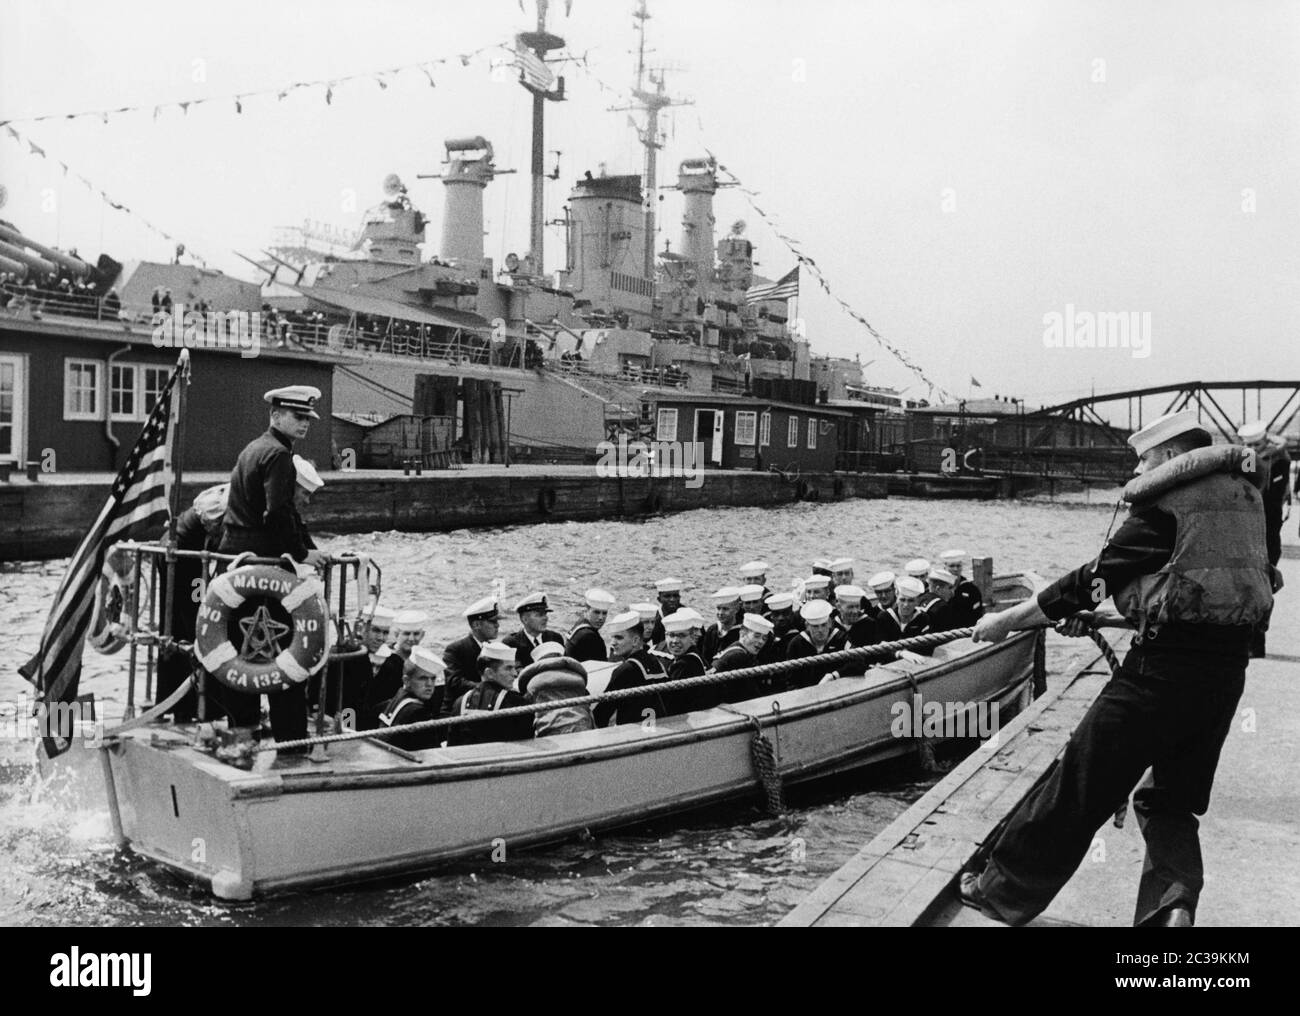 A dinghy of the heavy cruiser USS Macon (CA-132, seen in the background), is just mooring at the jetty. Sailors and officers of the crew are sitting in the boat. The occasion is a visit of the US Navy in Hamburg in the 1950s. Stock Photo